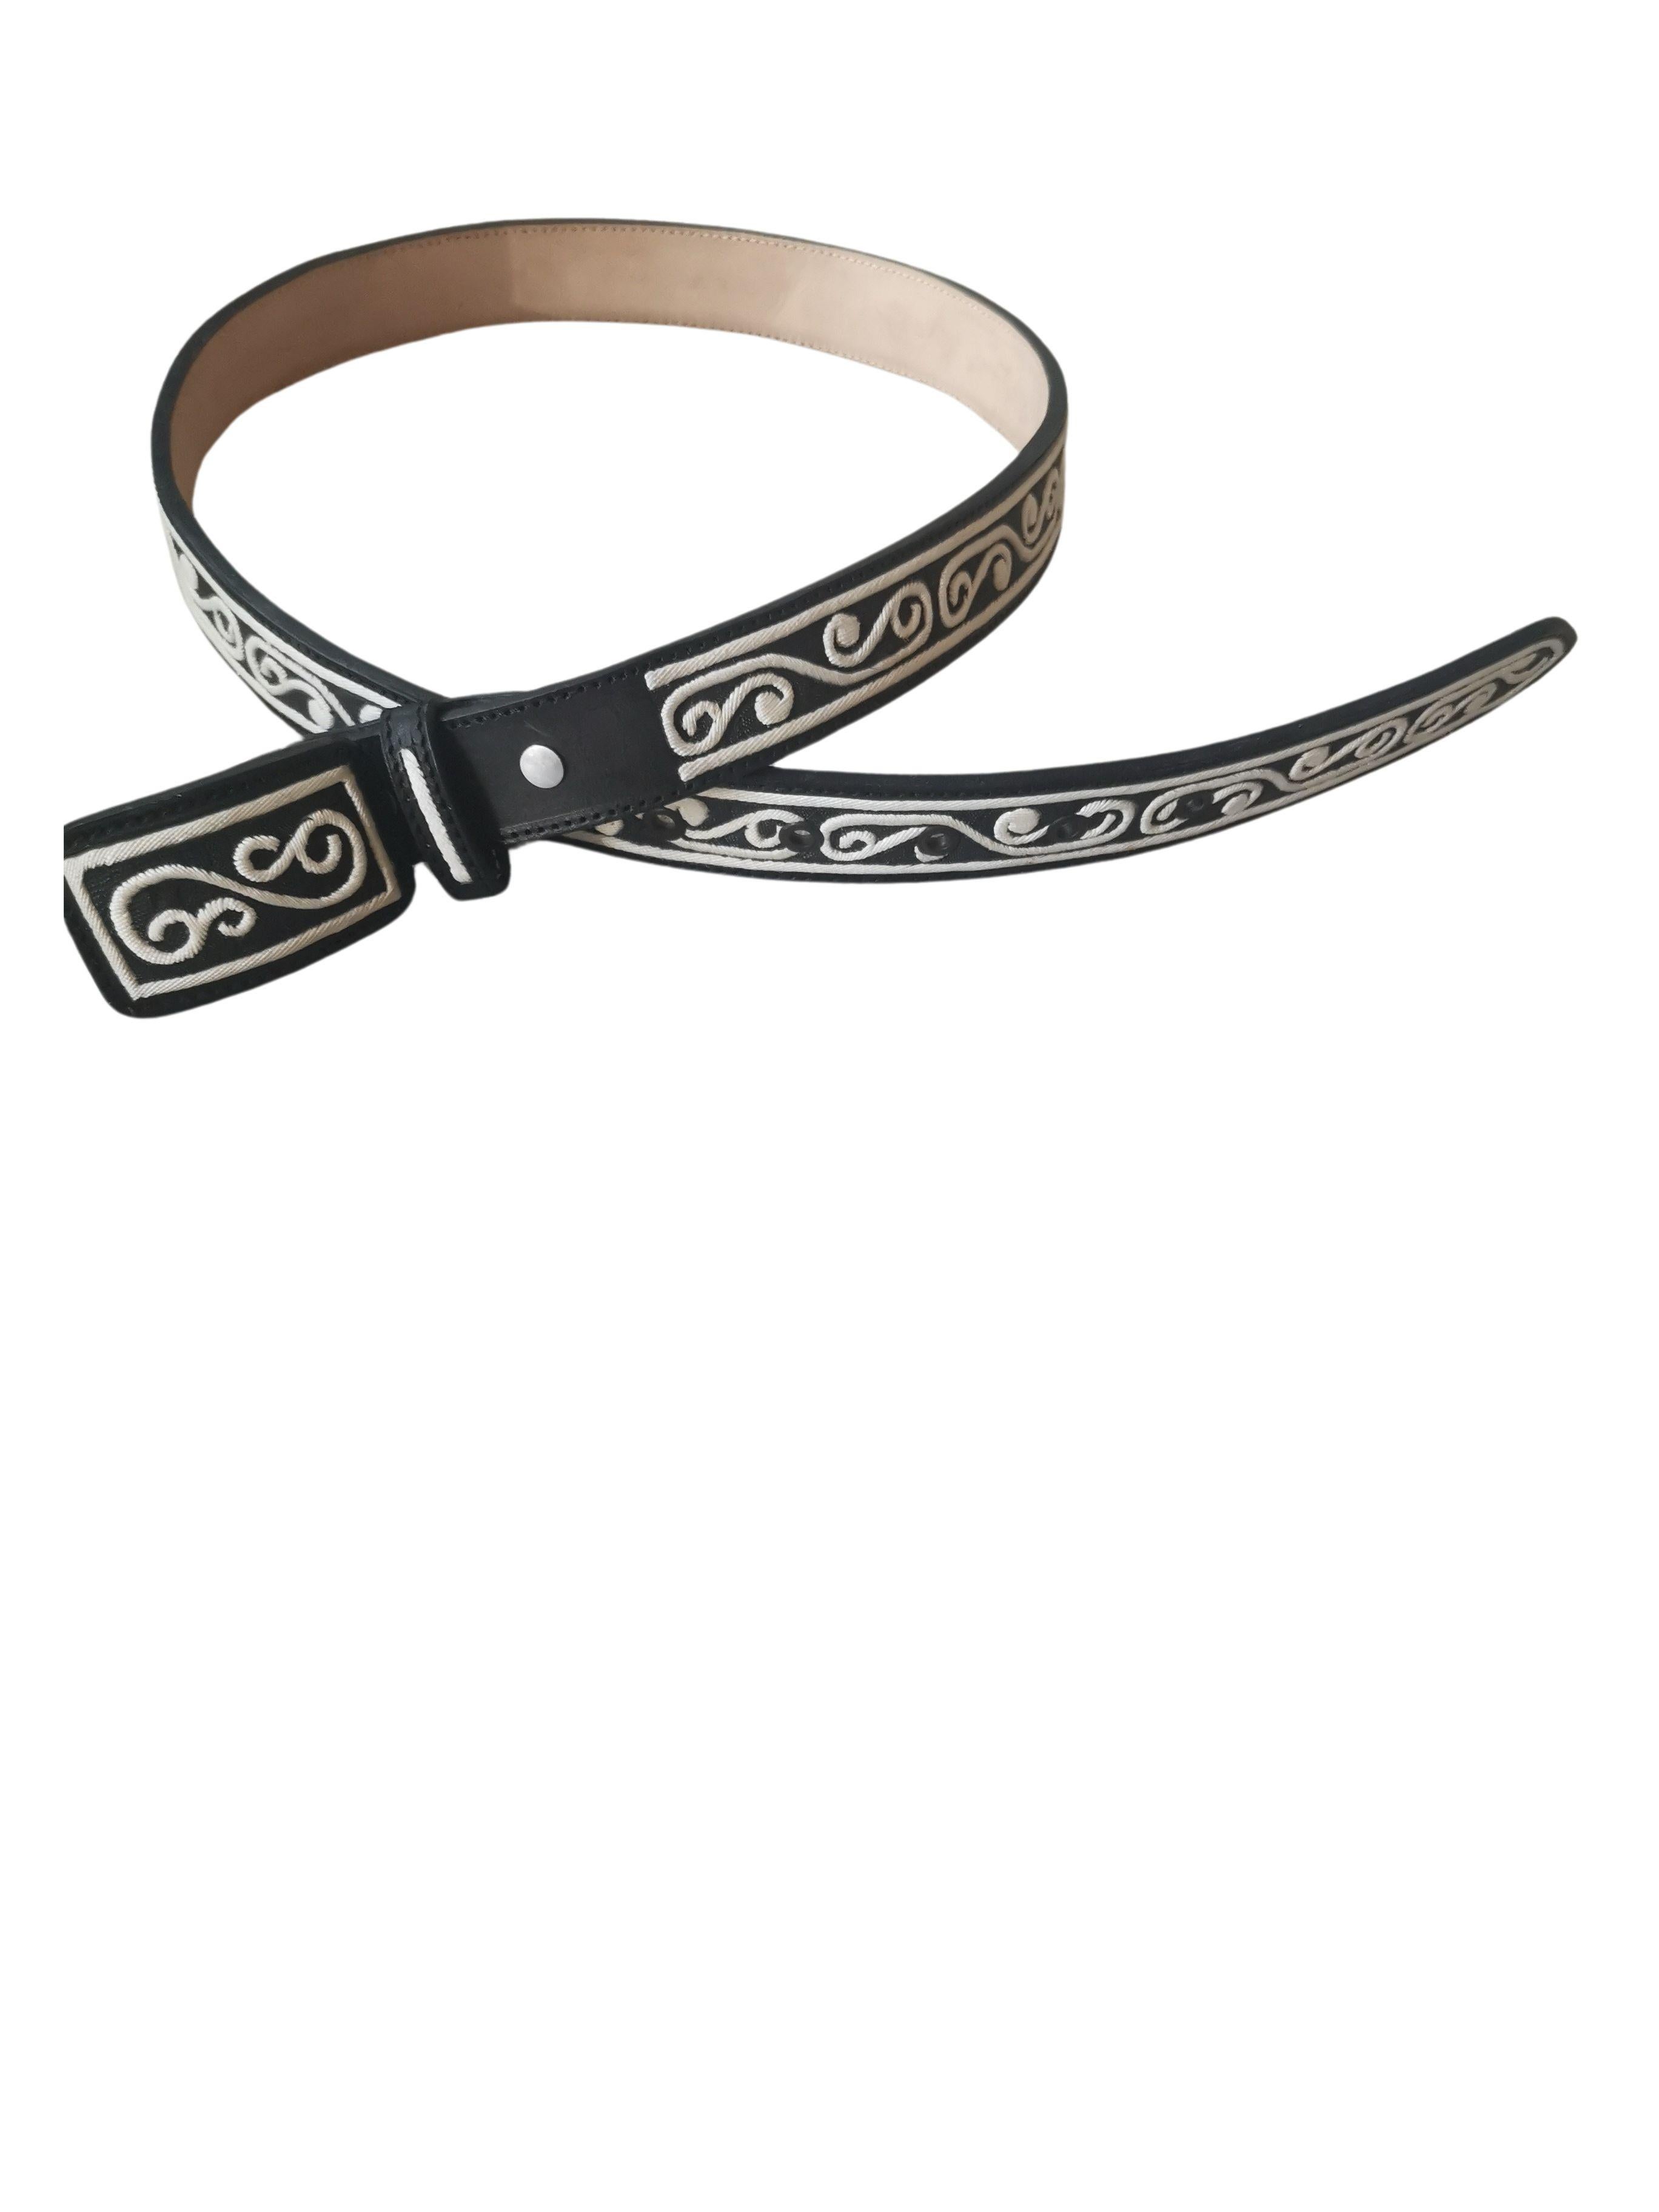 Traditional “Pita”  Belt and Buckle
Pita comes from the fiber of the big maguey
Or large Mexican cactus and is  hand inlaid
With Mexican charro designe.  The remaining 
Leather is hand worked
Colotlan, Jalisco, Mexico
Modern different sizes  brown